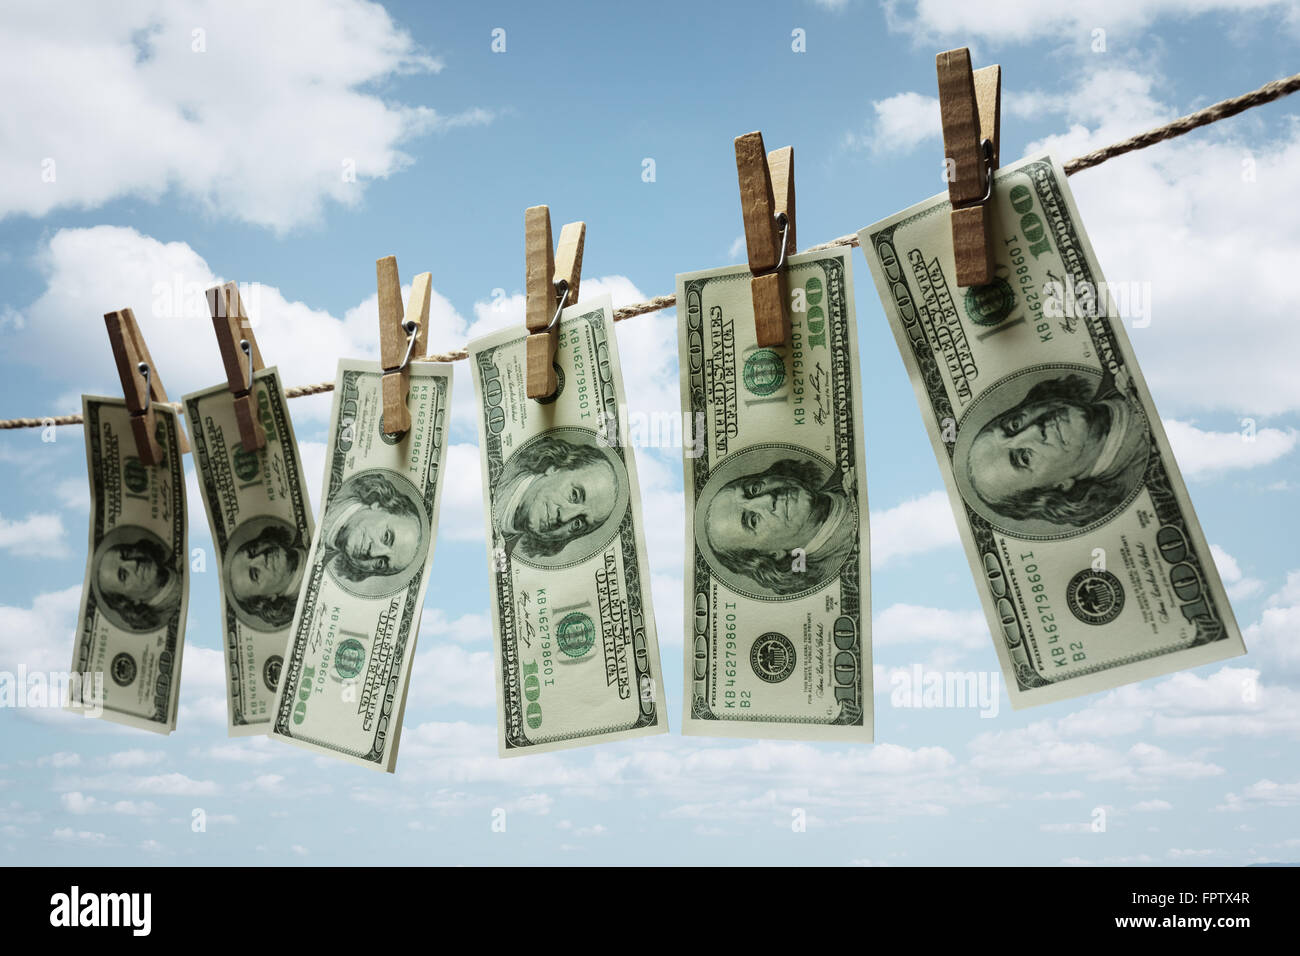 Hundred dollar bills hanging from a clothesline concept for money laundering, investment or venture capital funding Stock Photo